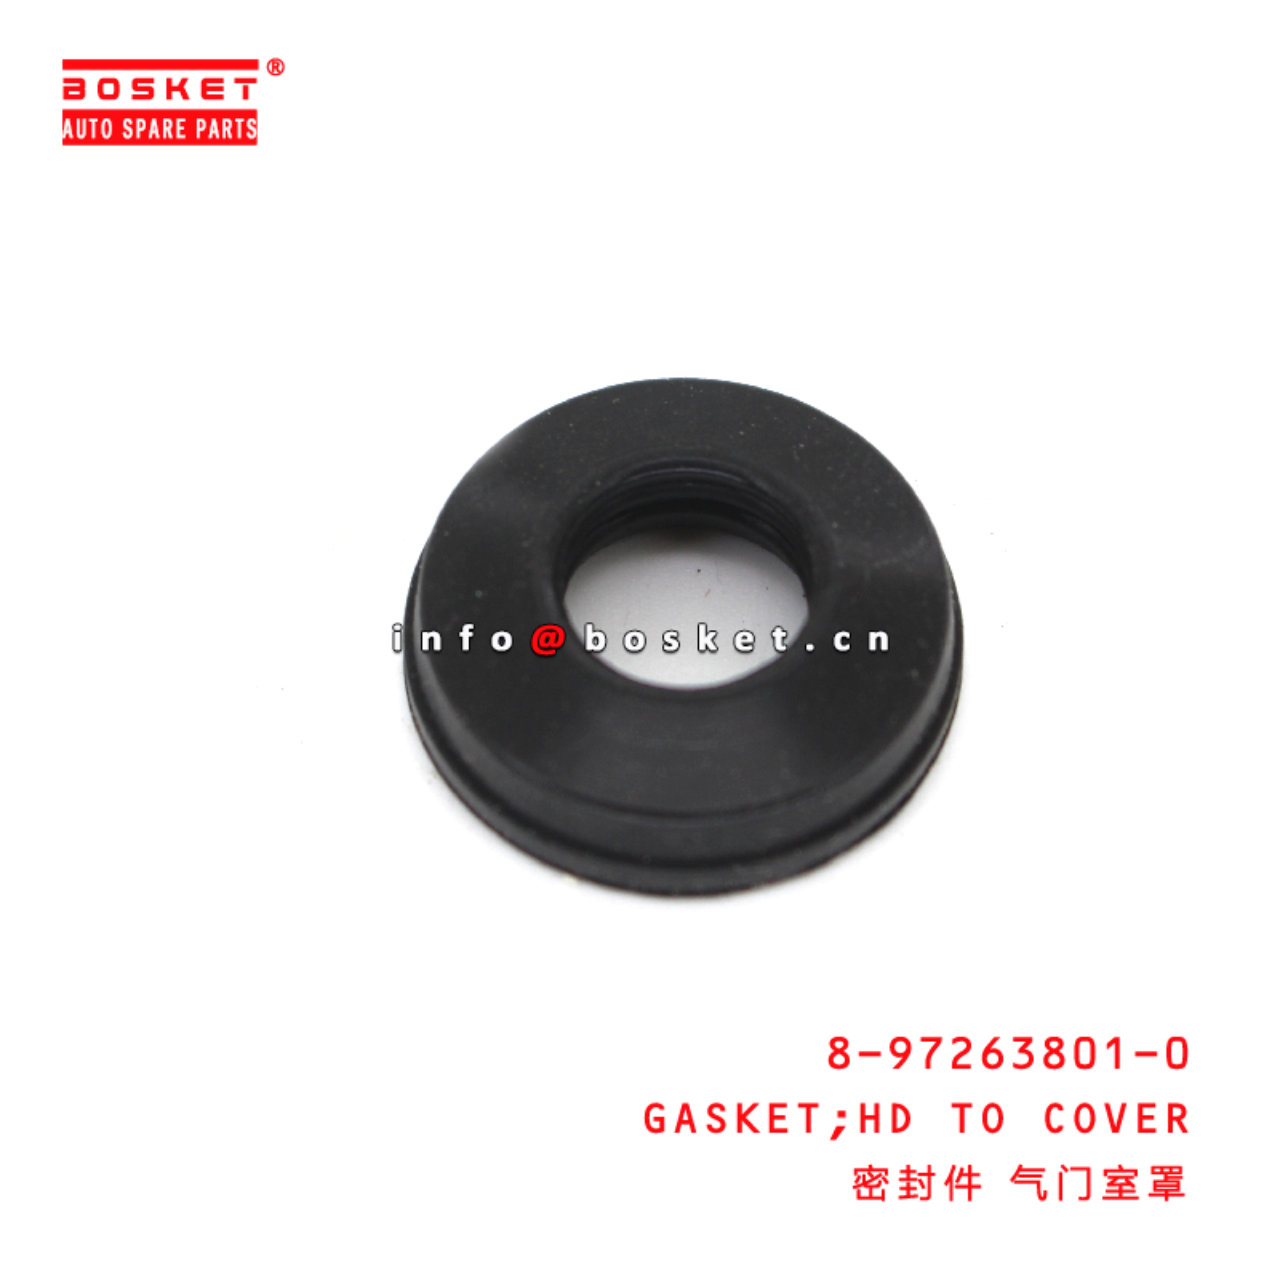 8-97263801-0 Head To Cover Gasket suitable for ISUZU DMAX  8972638010